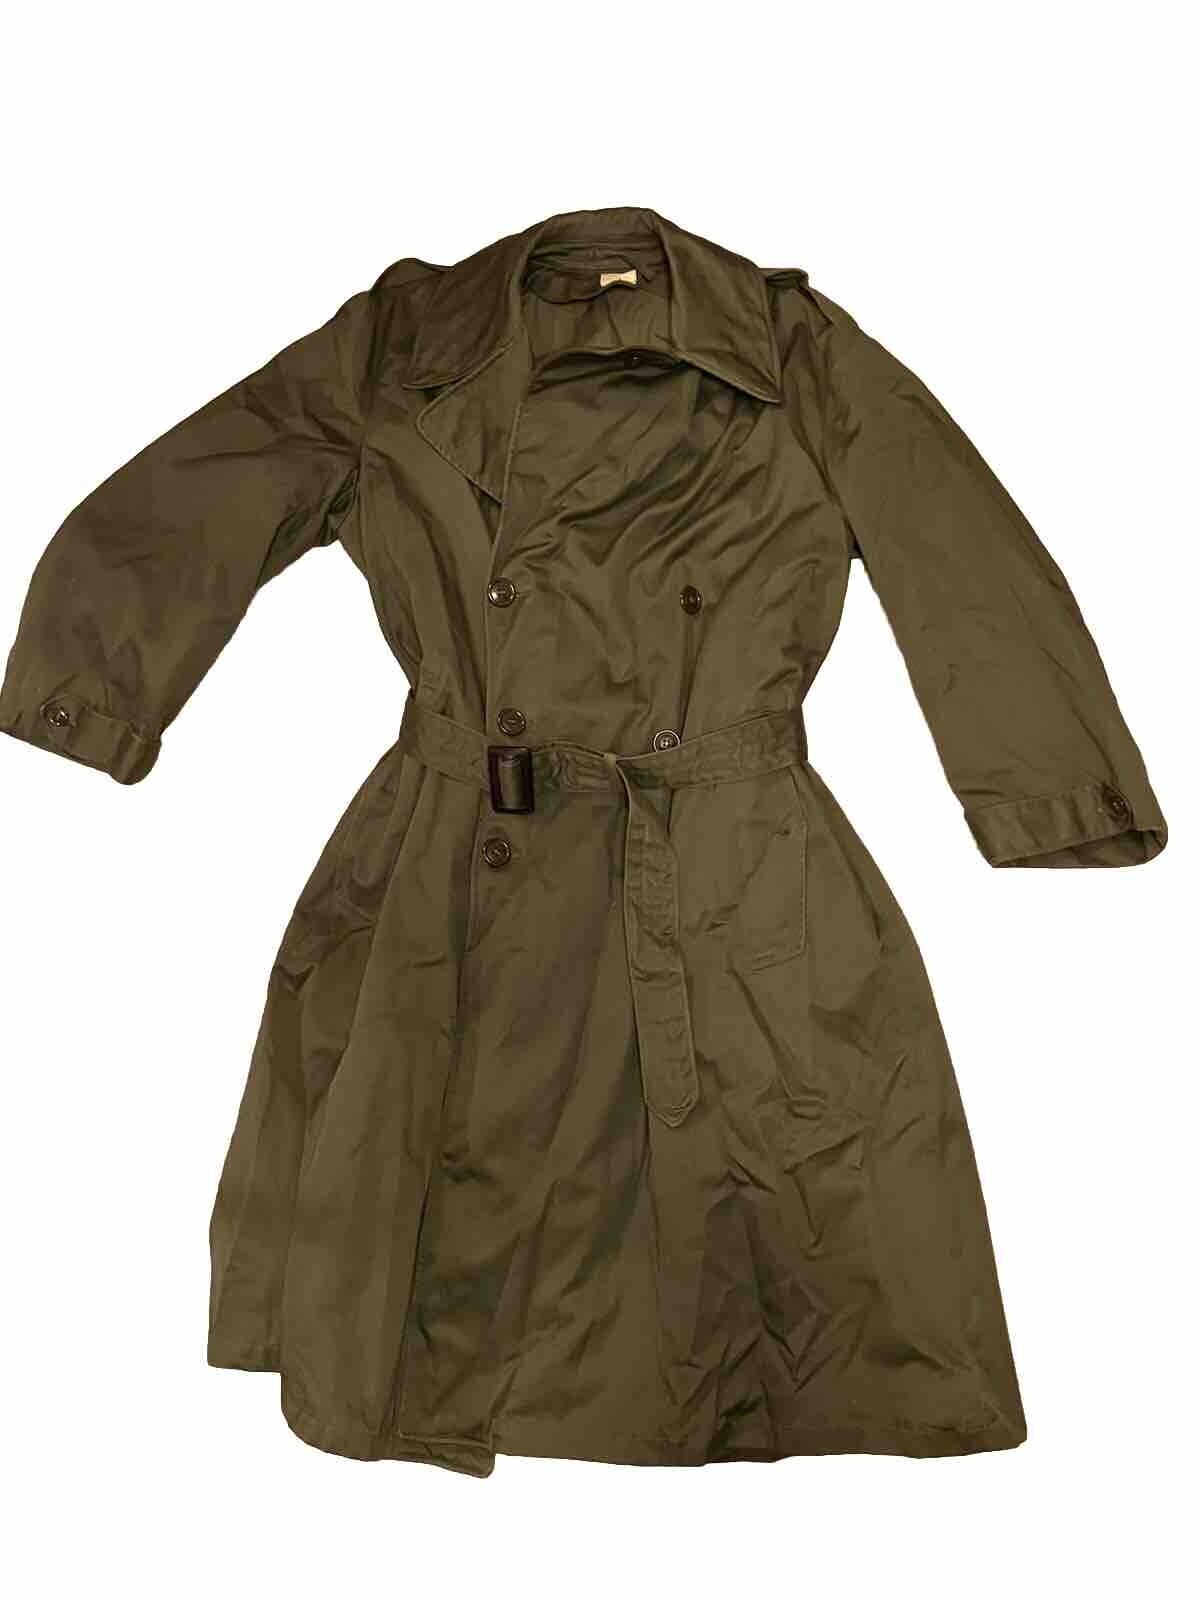 Military Overcoat Trench Green Sigmund Eisner 1946 Large Excellent